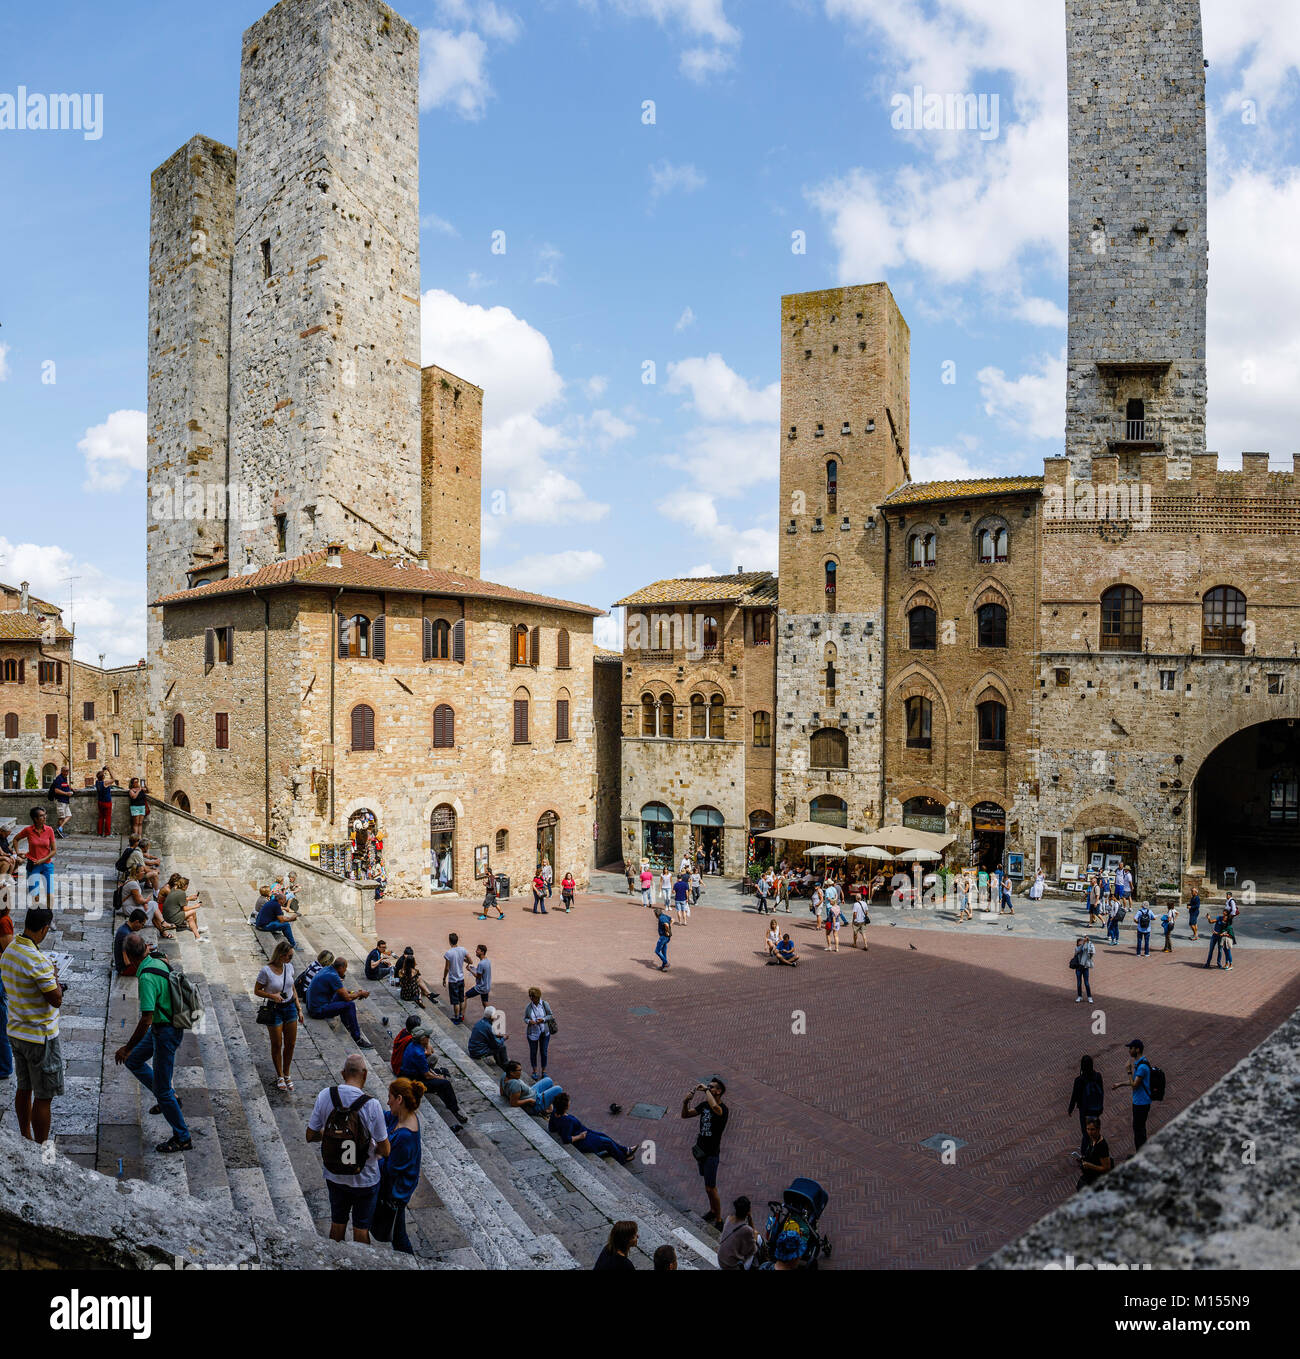 San Gimignano is a small walled medieval hill town known as the Town of Fine Towers. San Gimignano is famous for its medieval architecture. Stock Photo